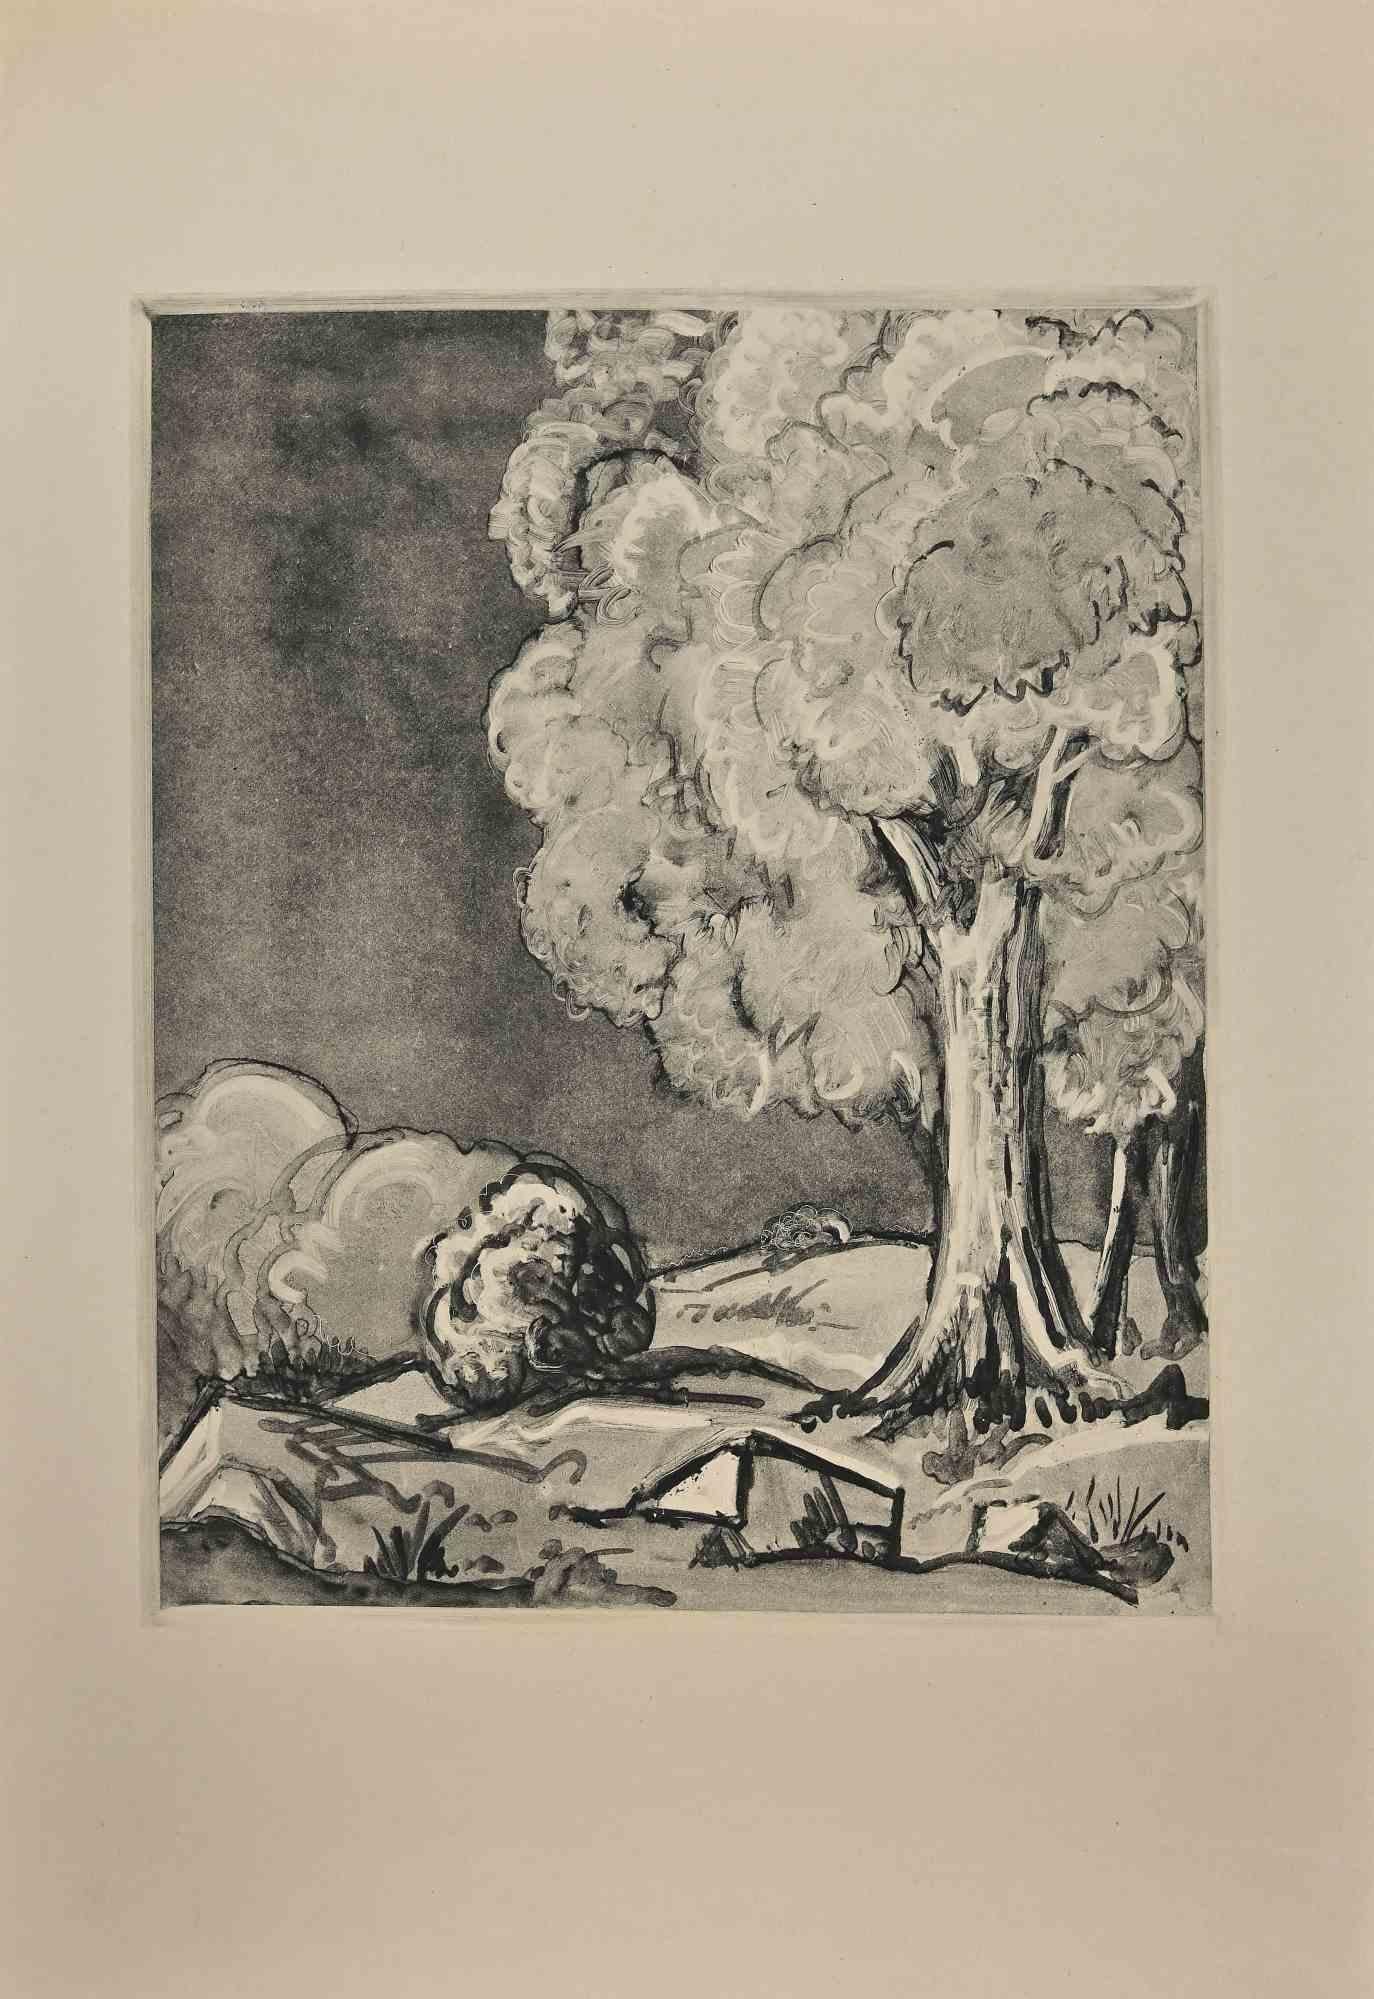 Georges-Henri Tribout Figurative Print - Landscape with Trees - Original Etching by George-Henri Tribout - 1930s